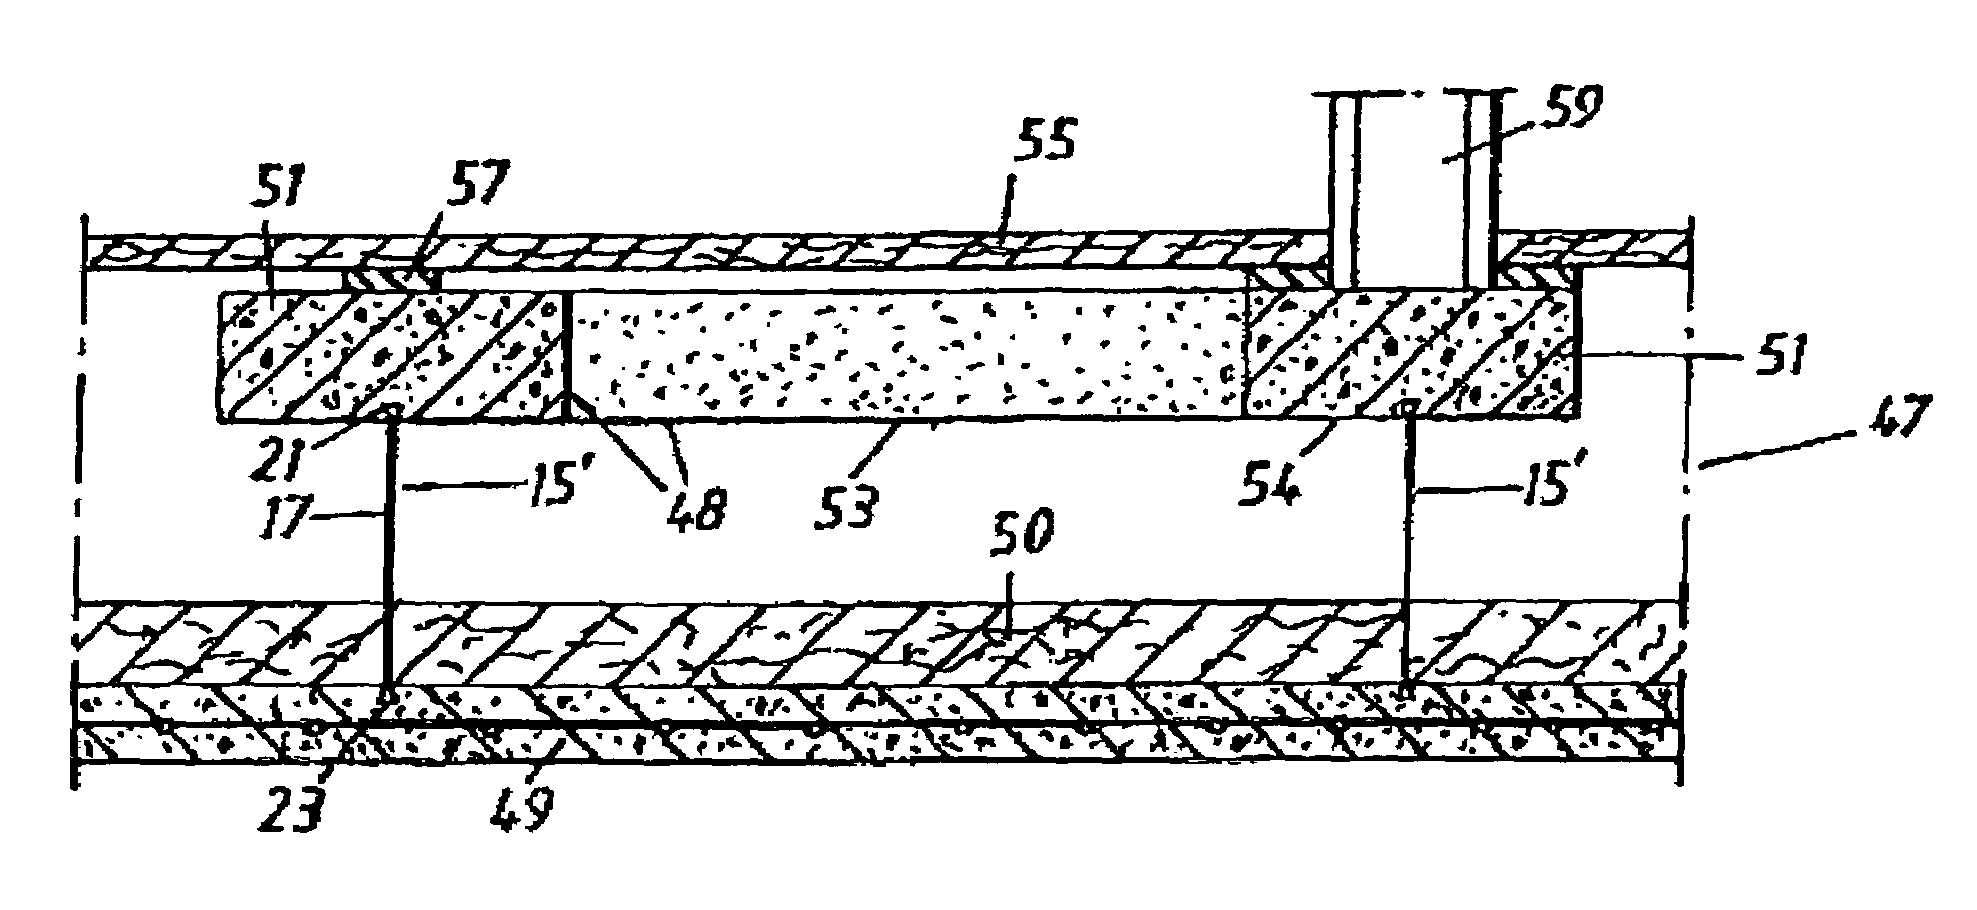 Building structure element and stiffening plate elements for such an element